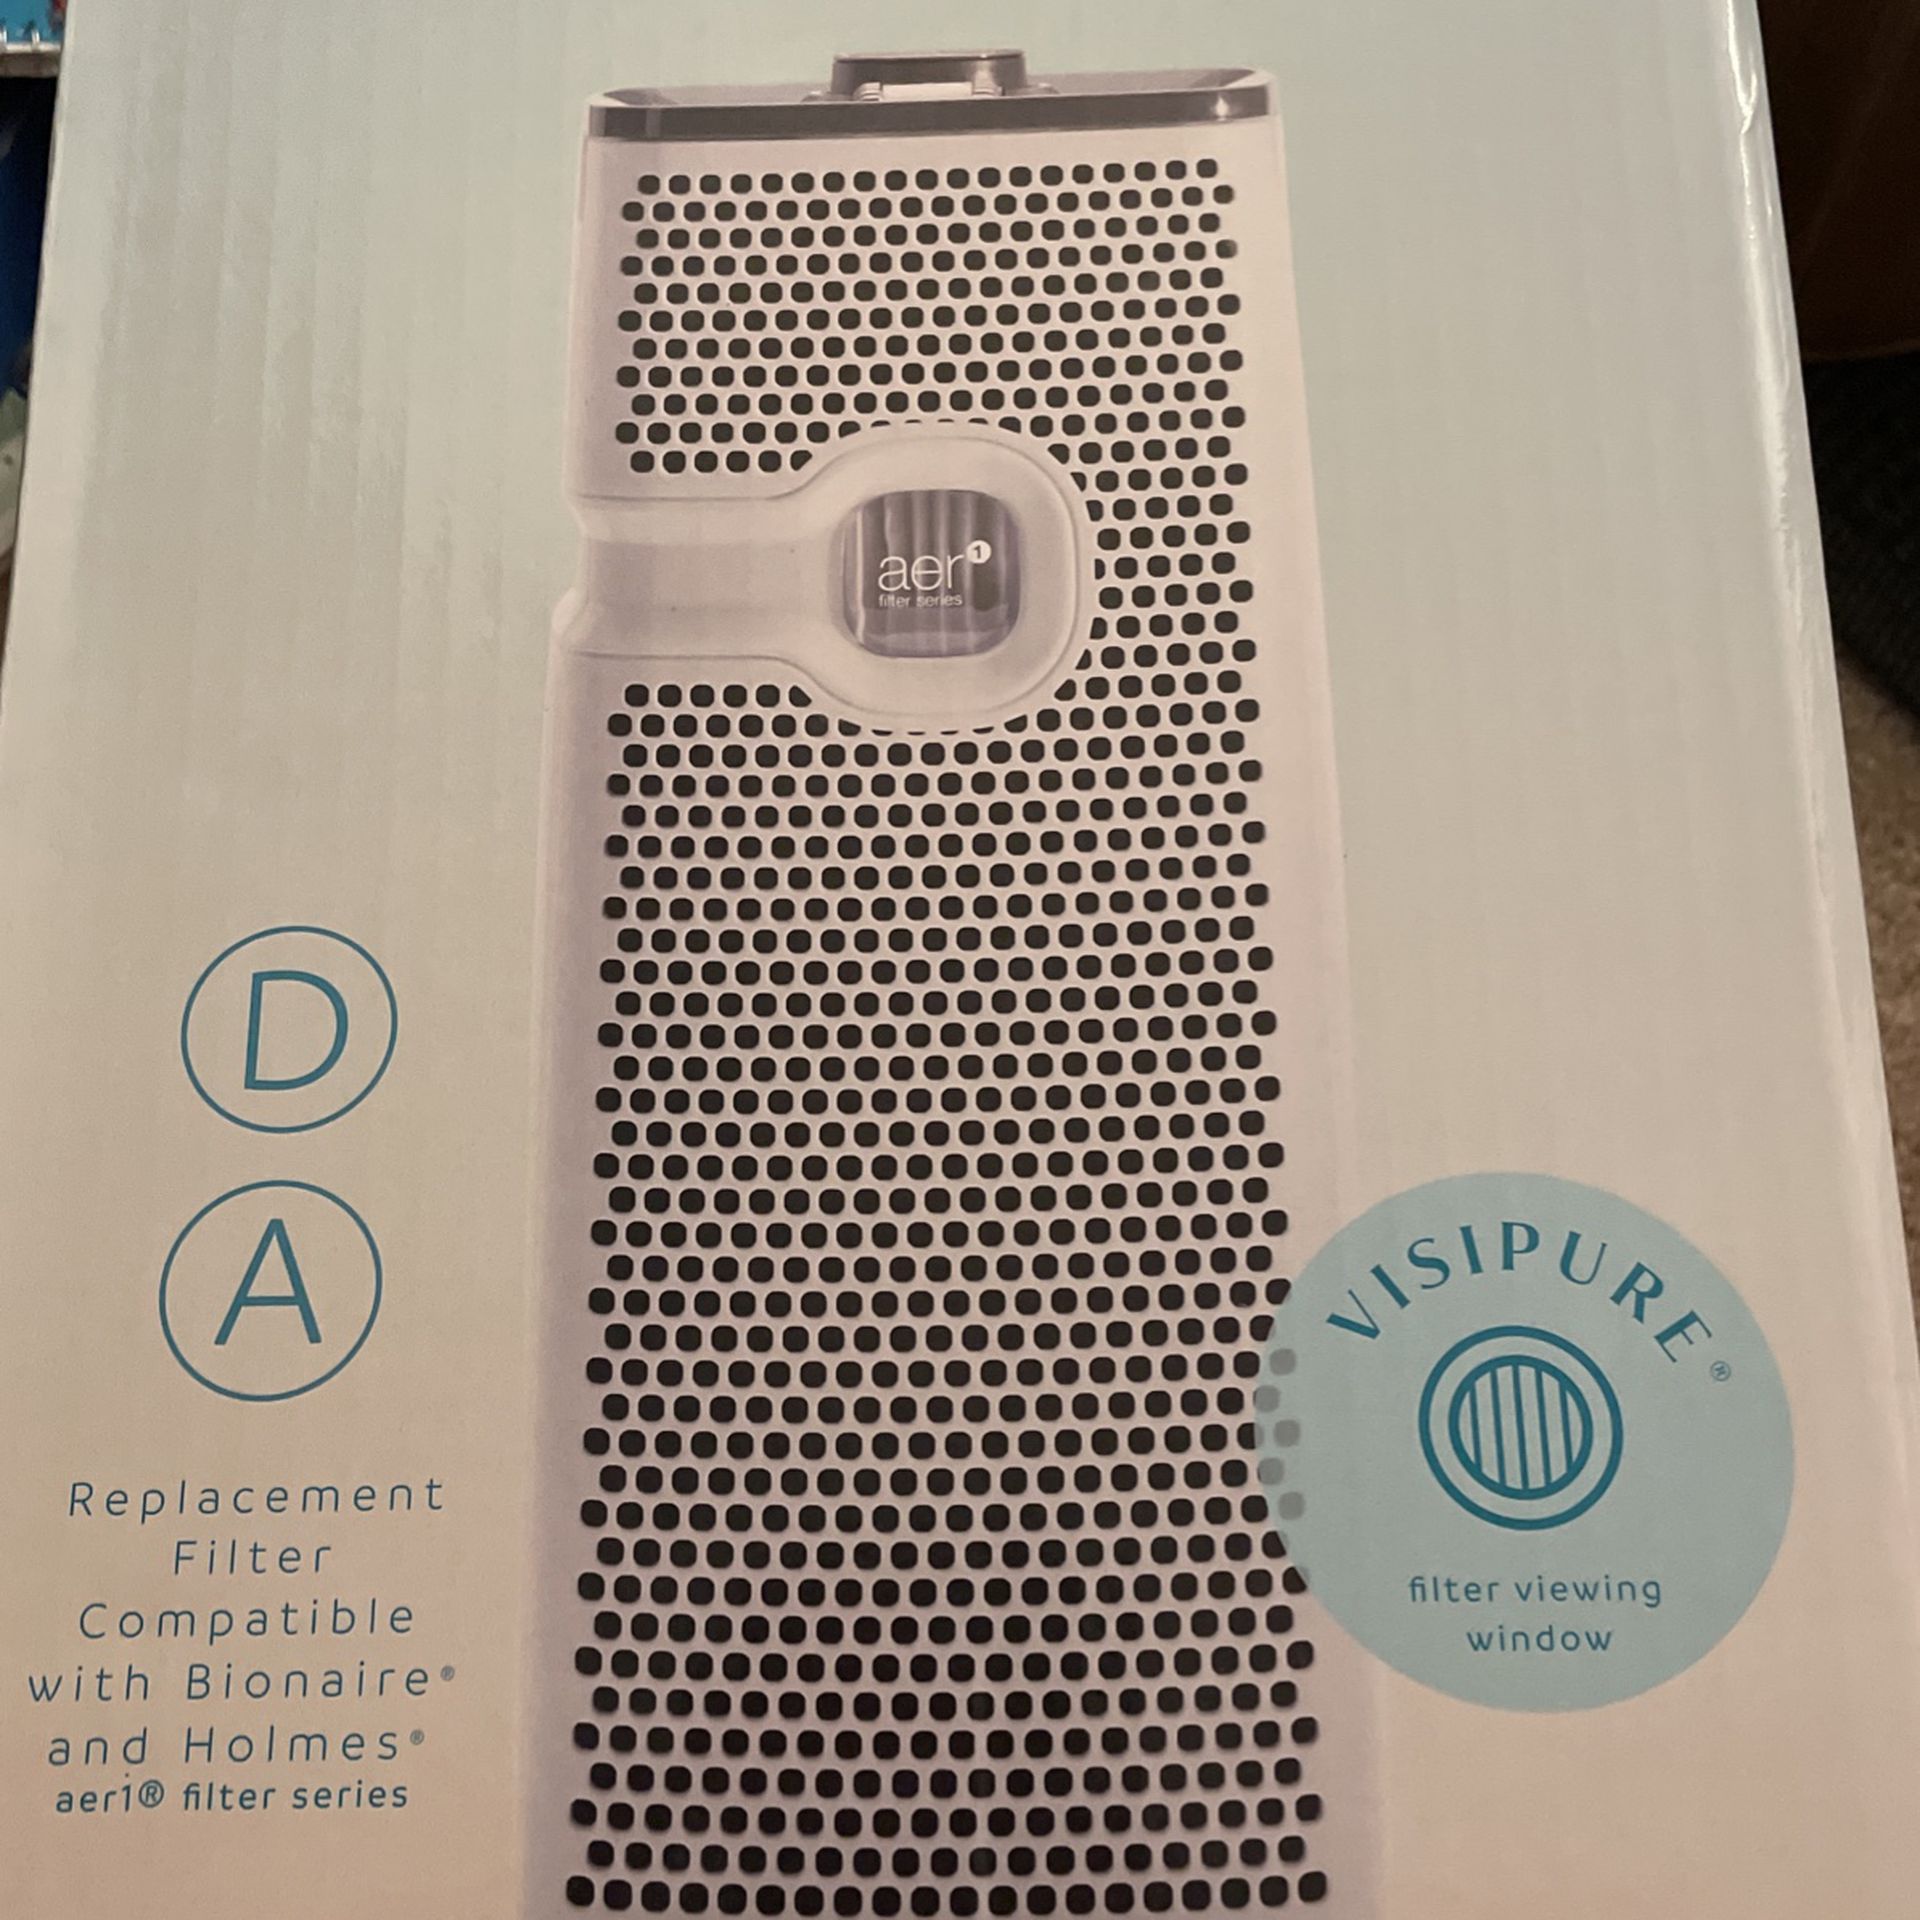 New In Box New, Bionaire Aer1 Mini Tower Air Purifier with True HEPA